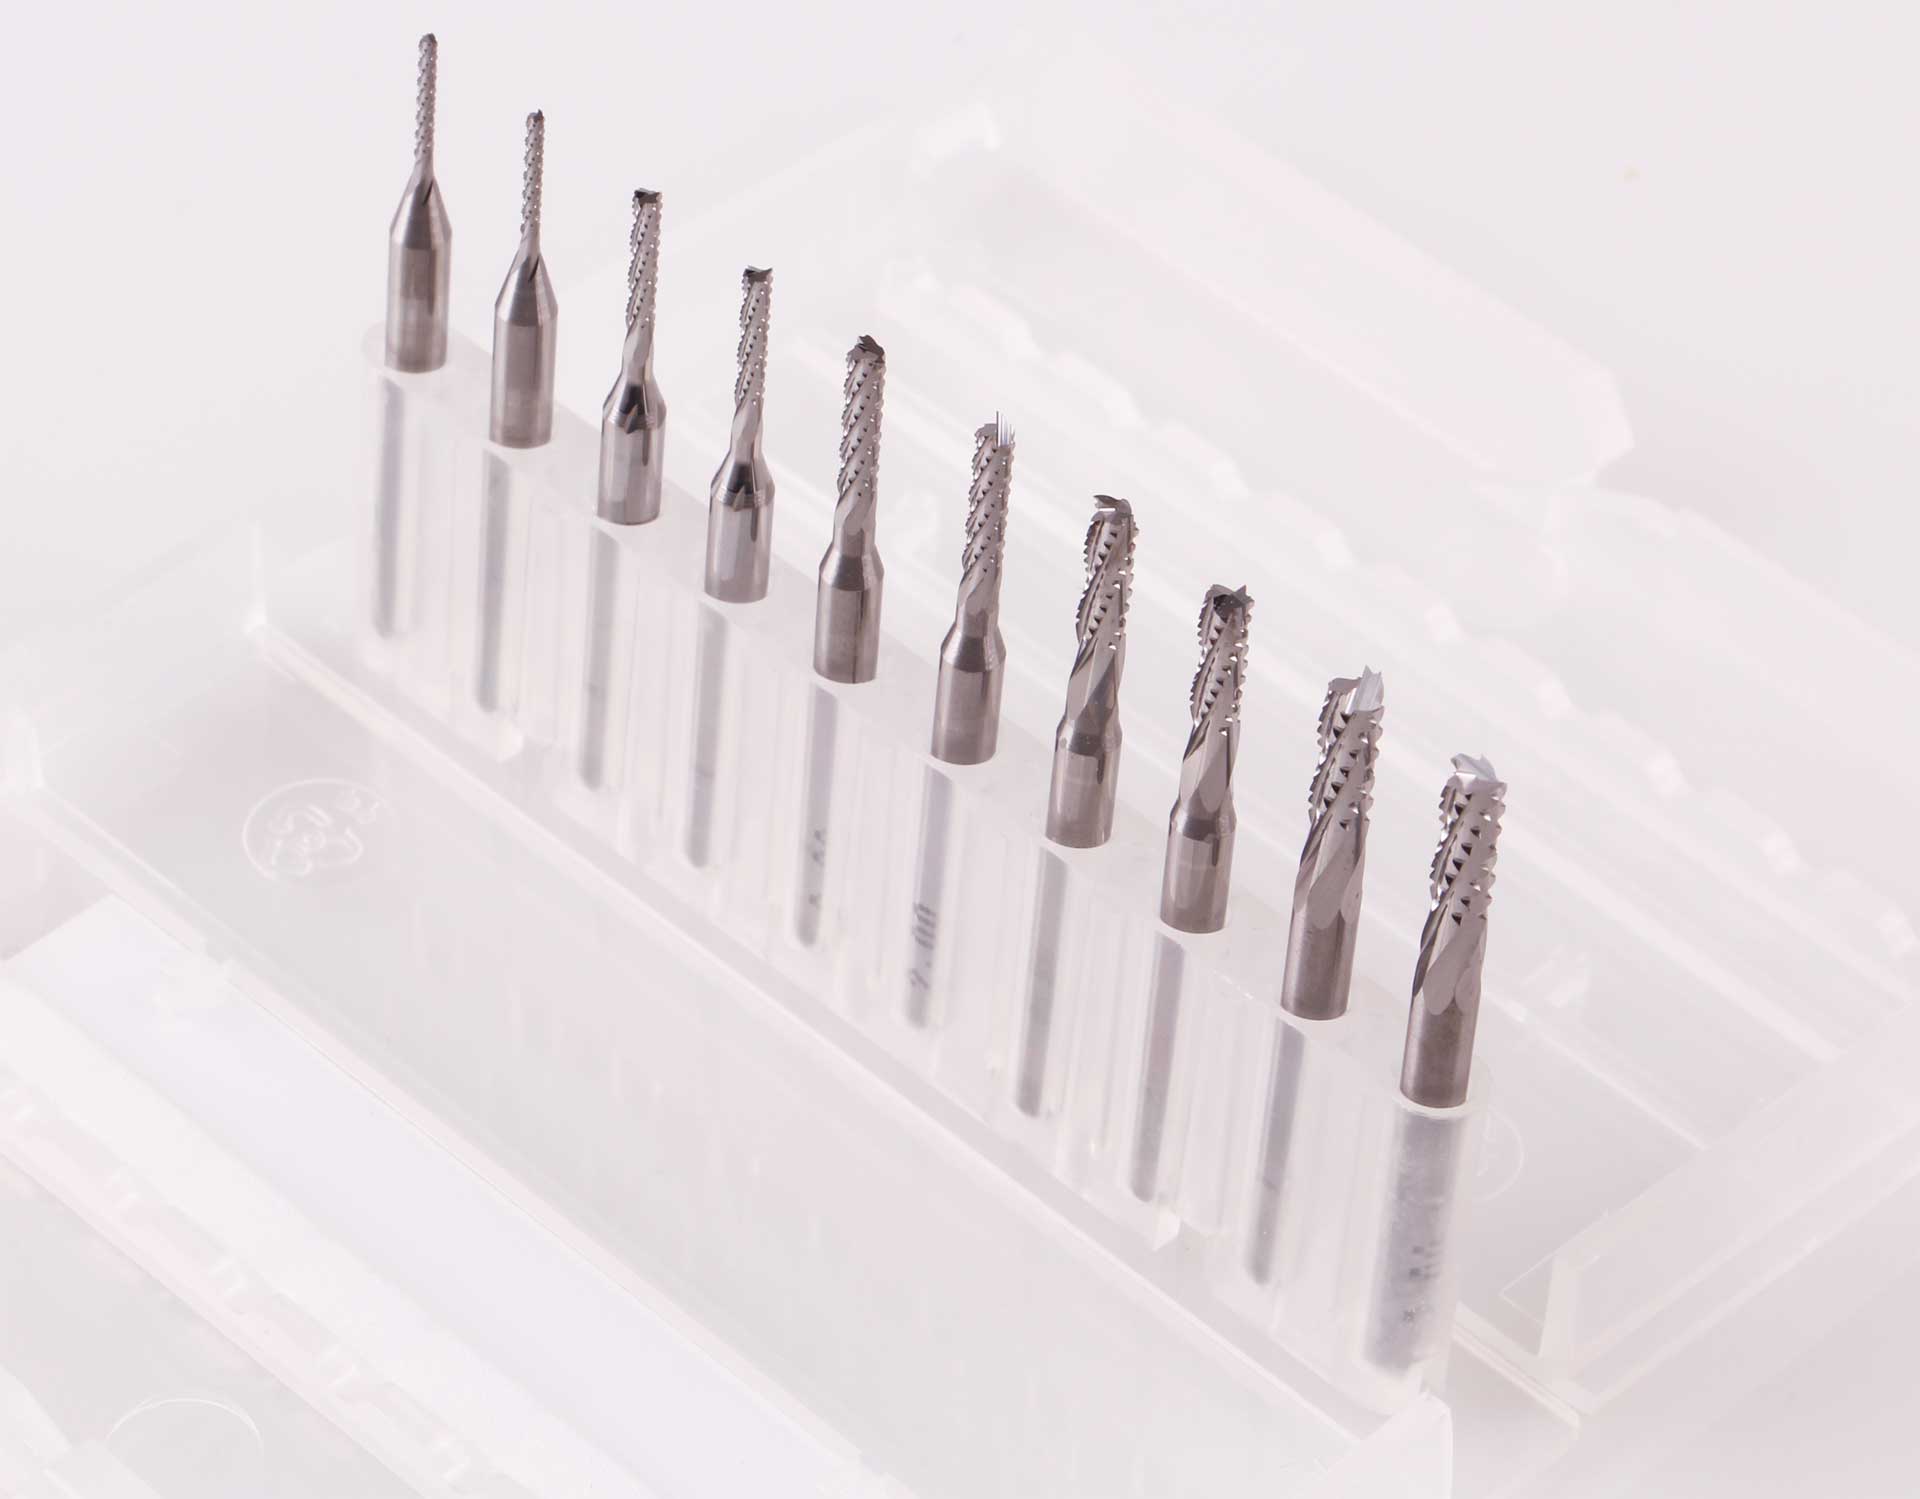 PLANET-HOBBY Spiral toothed solid carbide cutter Set 10pcs (1.0/1.5/2.0/2.5/3.0mm)